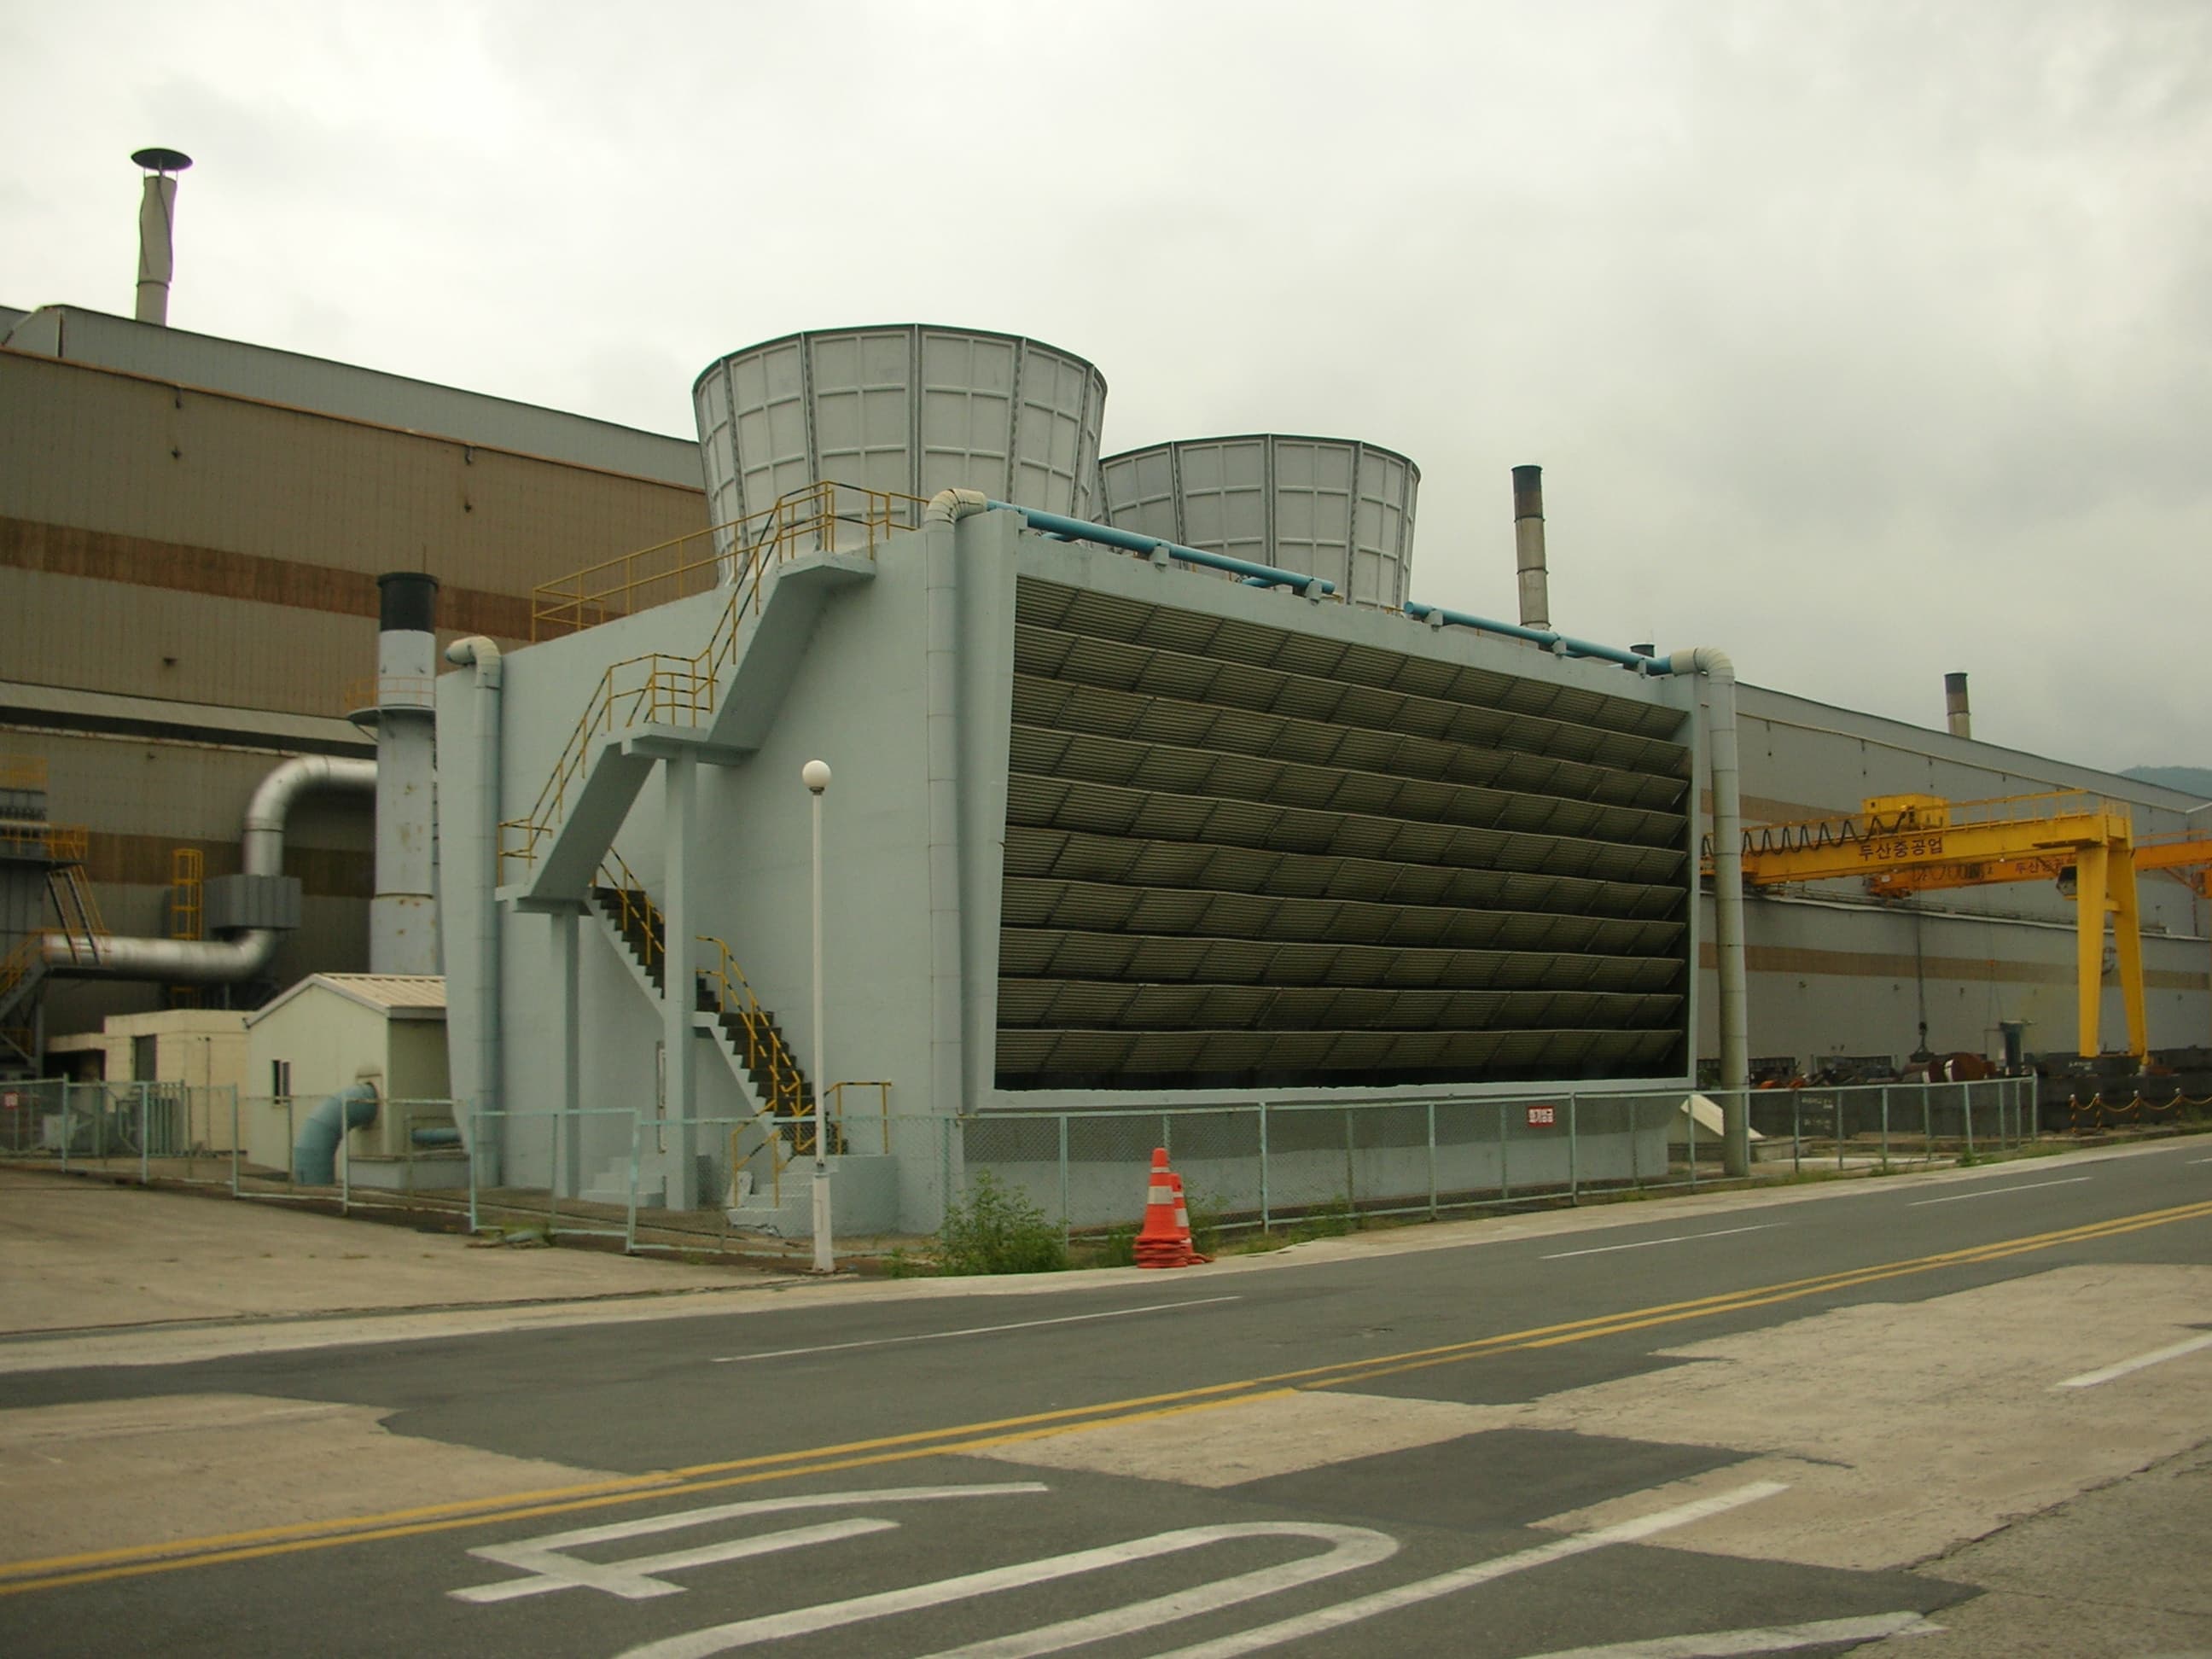 COOLING TOWER